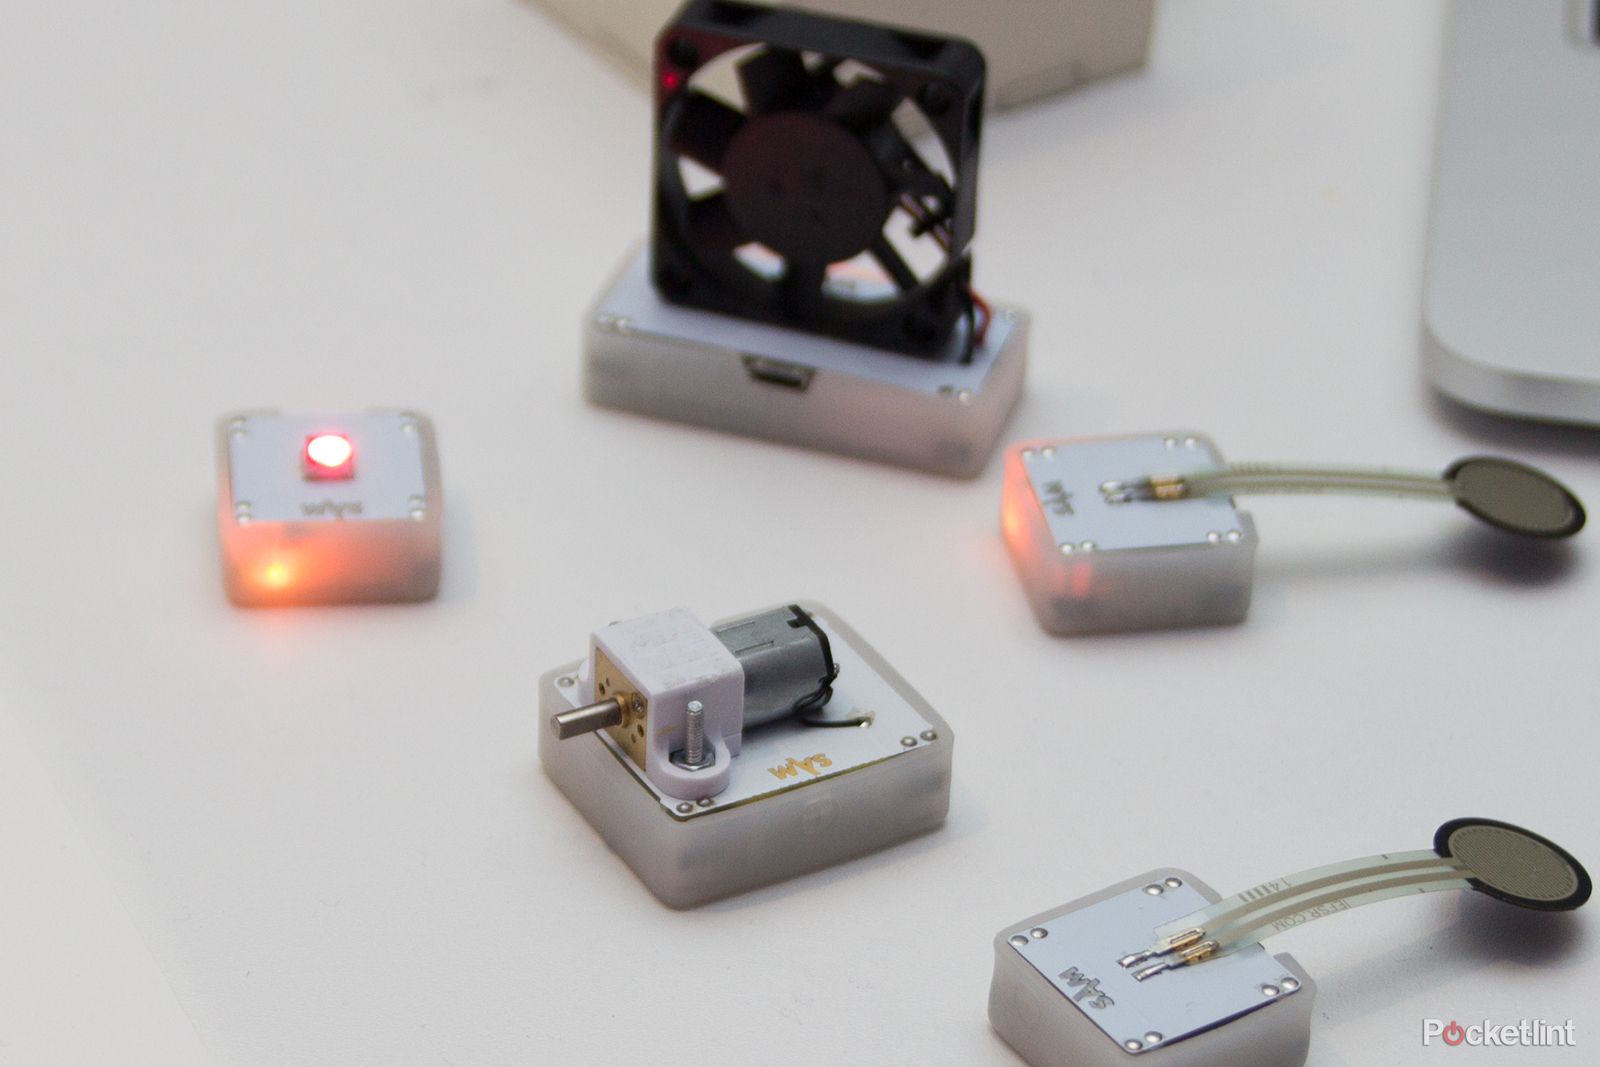 sam labs wants to help you build the internet of things with its bluetooth blocks image 1